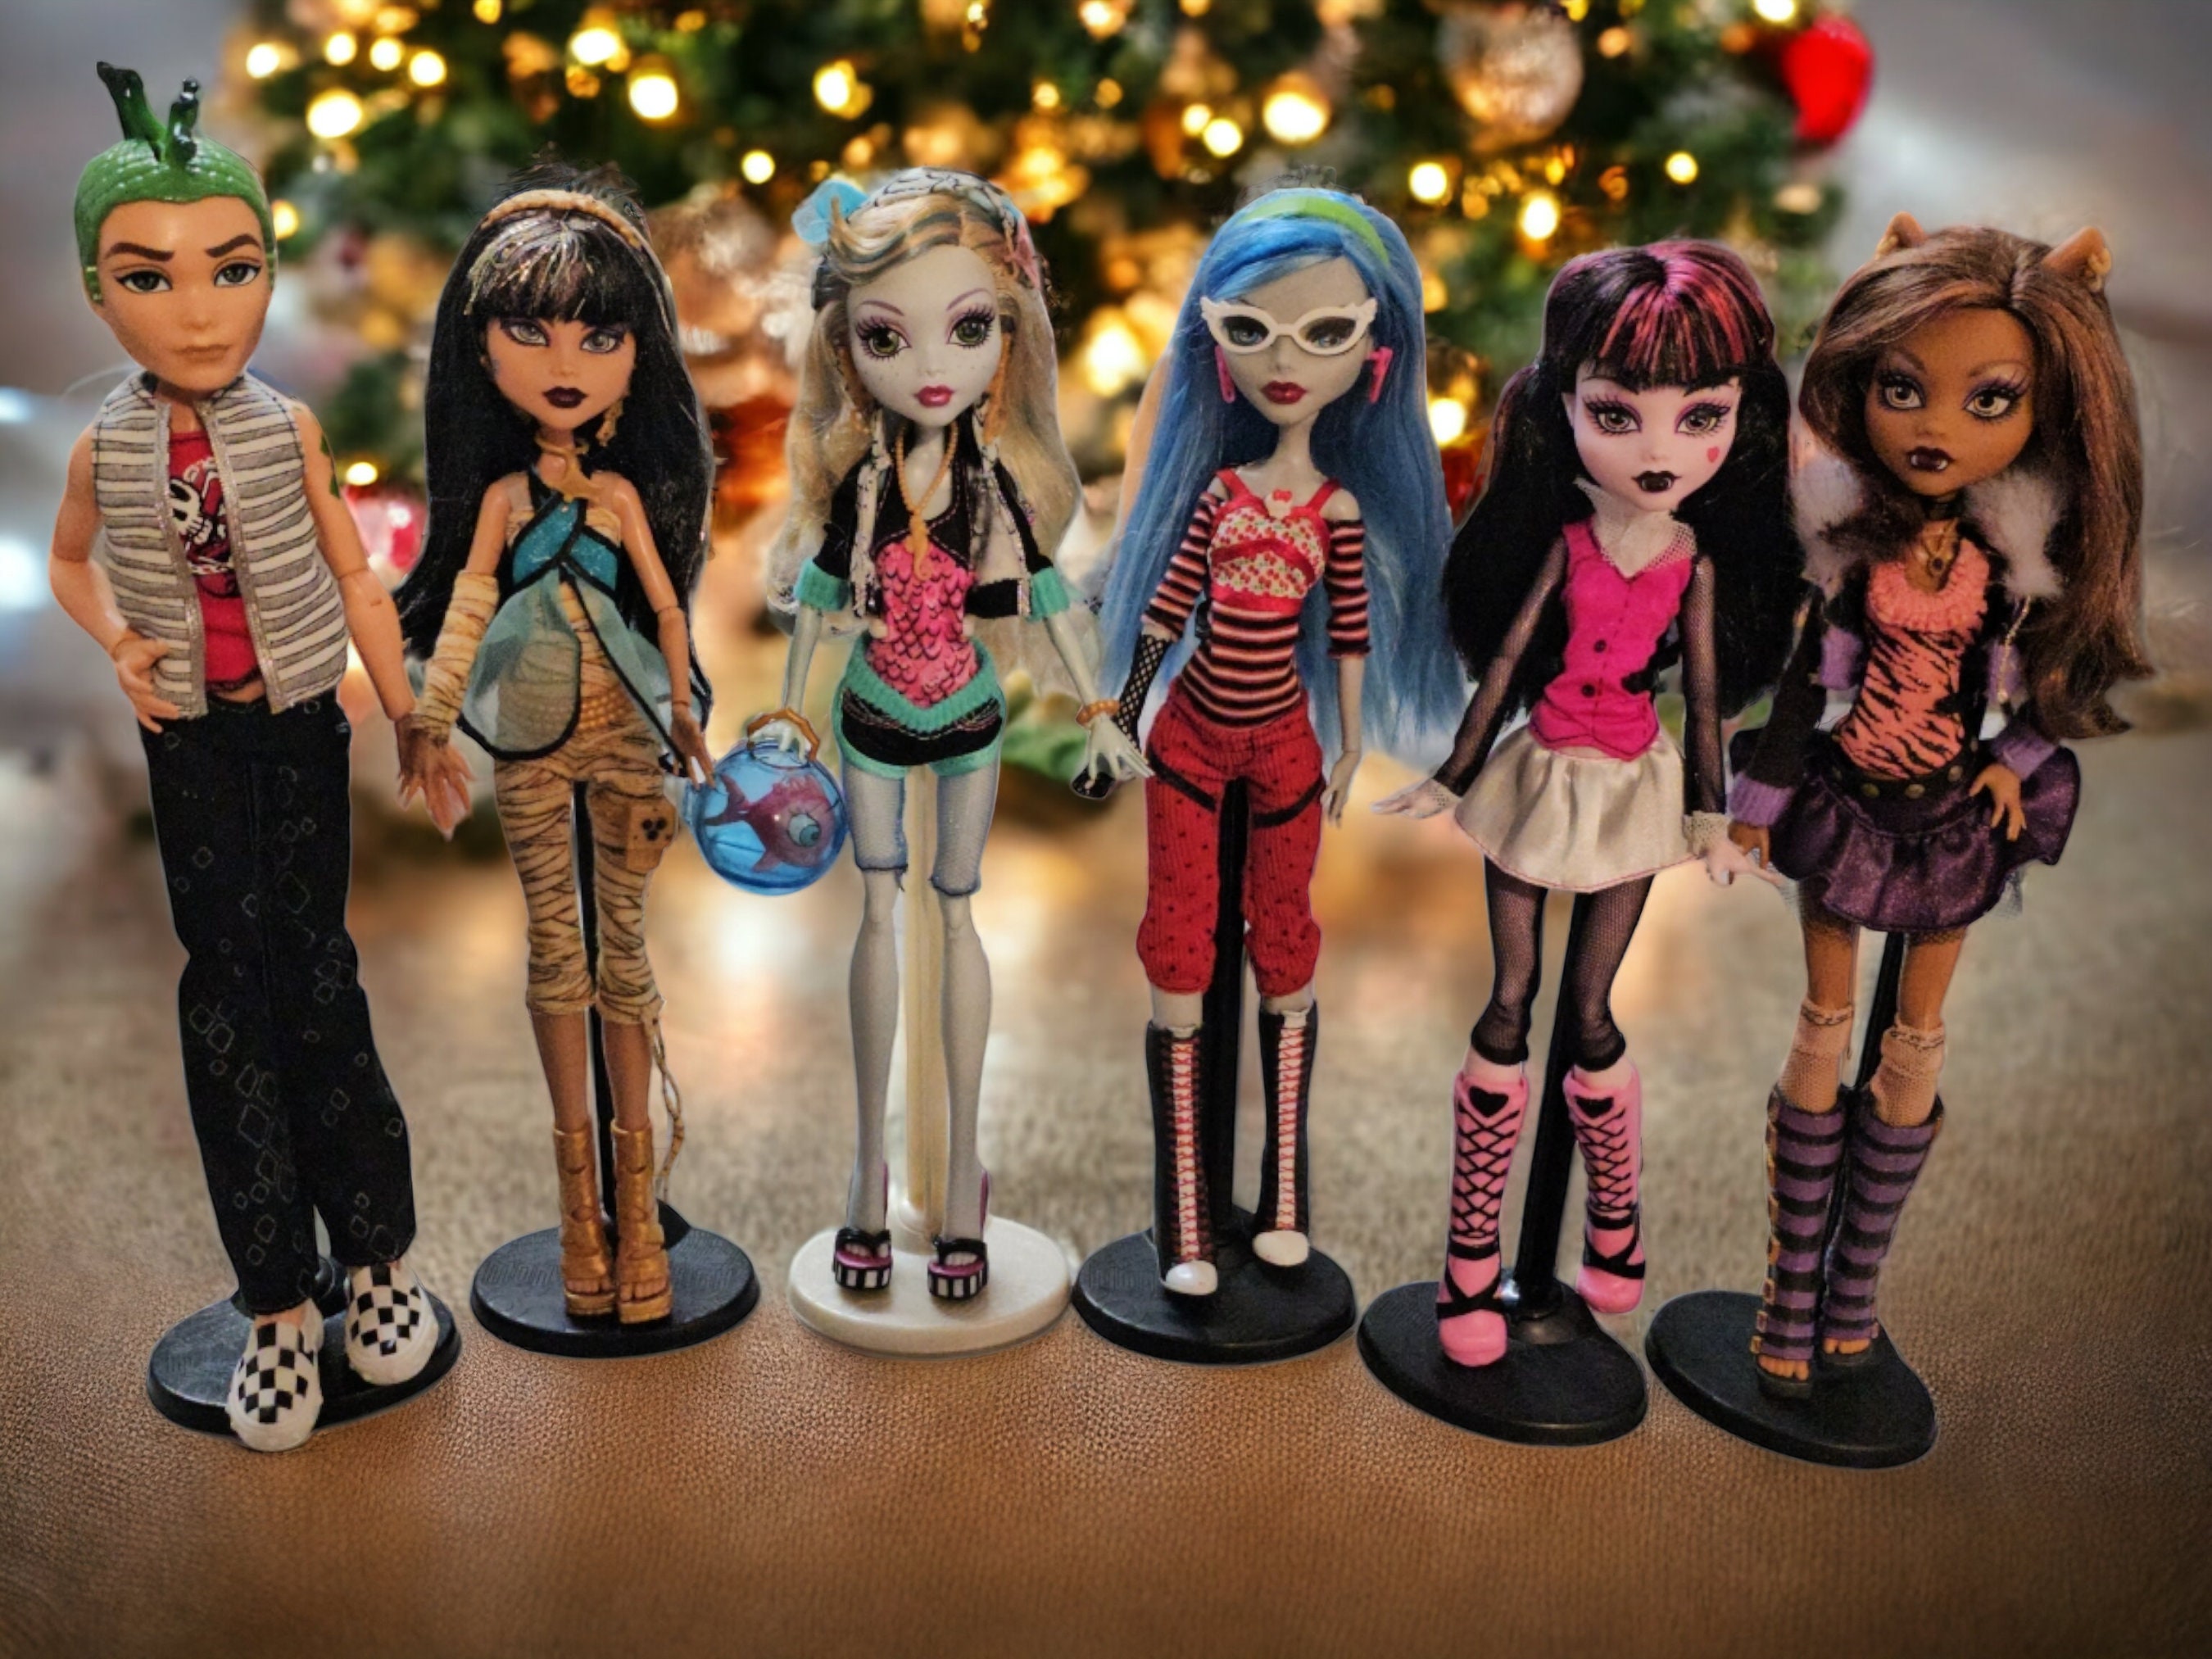 Original Monster High Dolls Dressed With Accessories Collectible Spectra  Ghouls Getaway /haunted Twyla/skelita/bunny Lapin,choose One Doll -   Norway